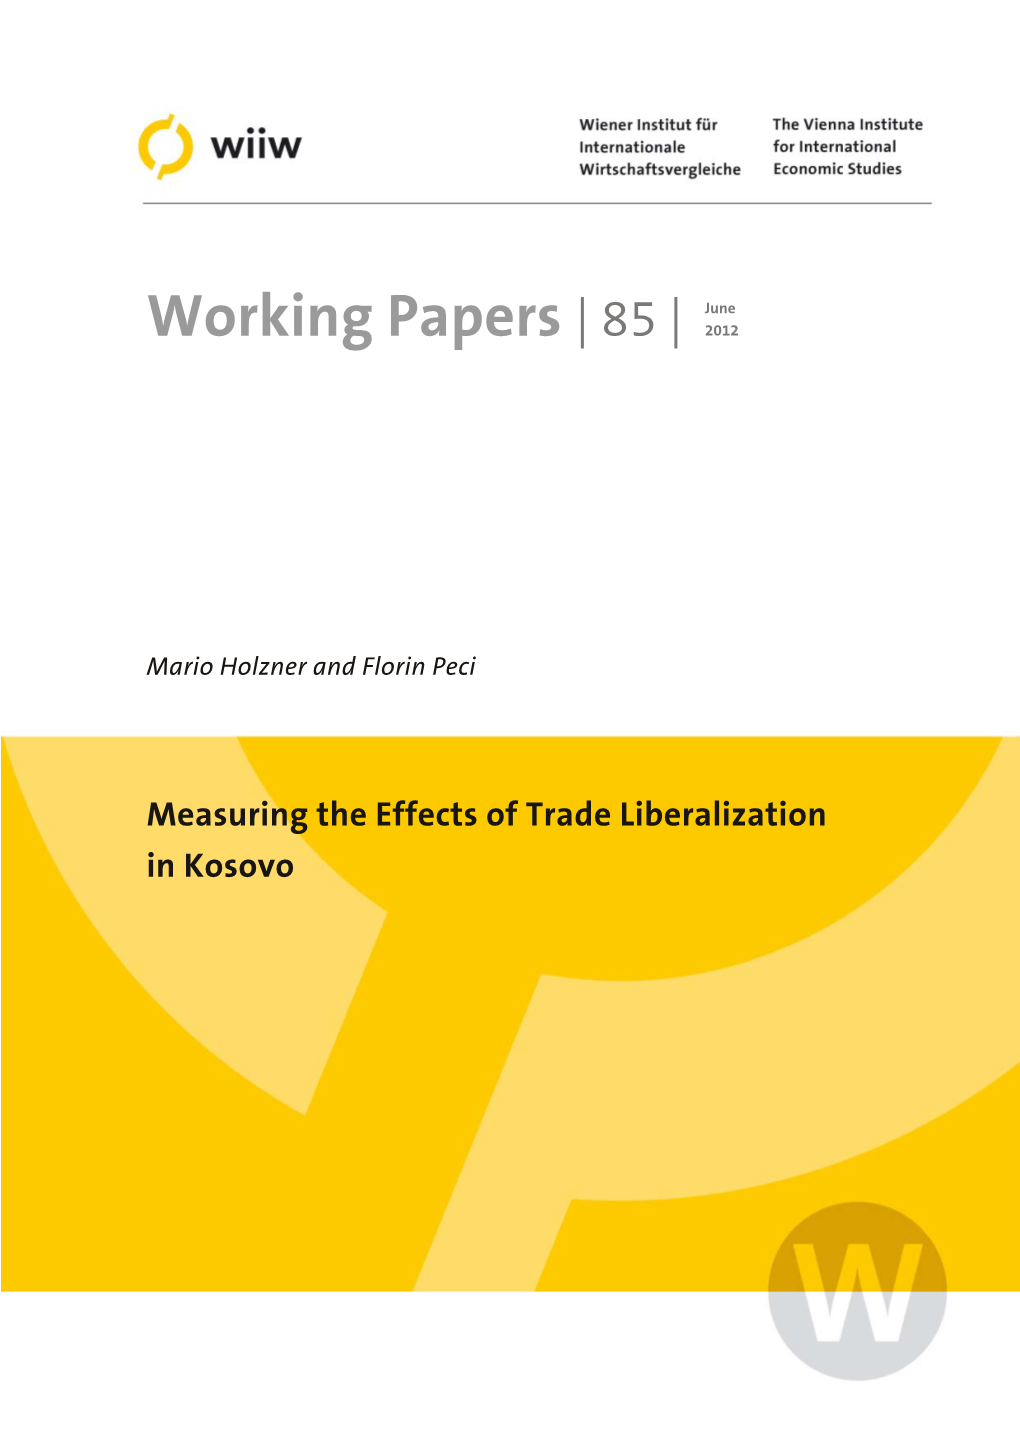 Wiiw Working Paper 85: Measuring the Effects of Trade Liberalization In